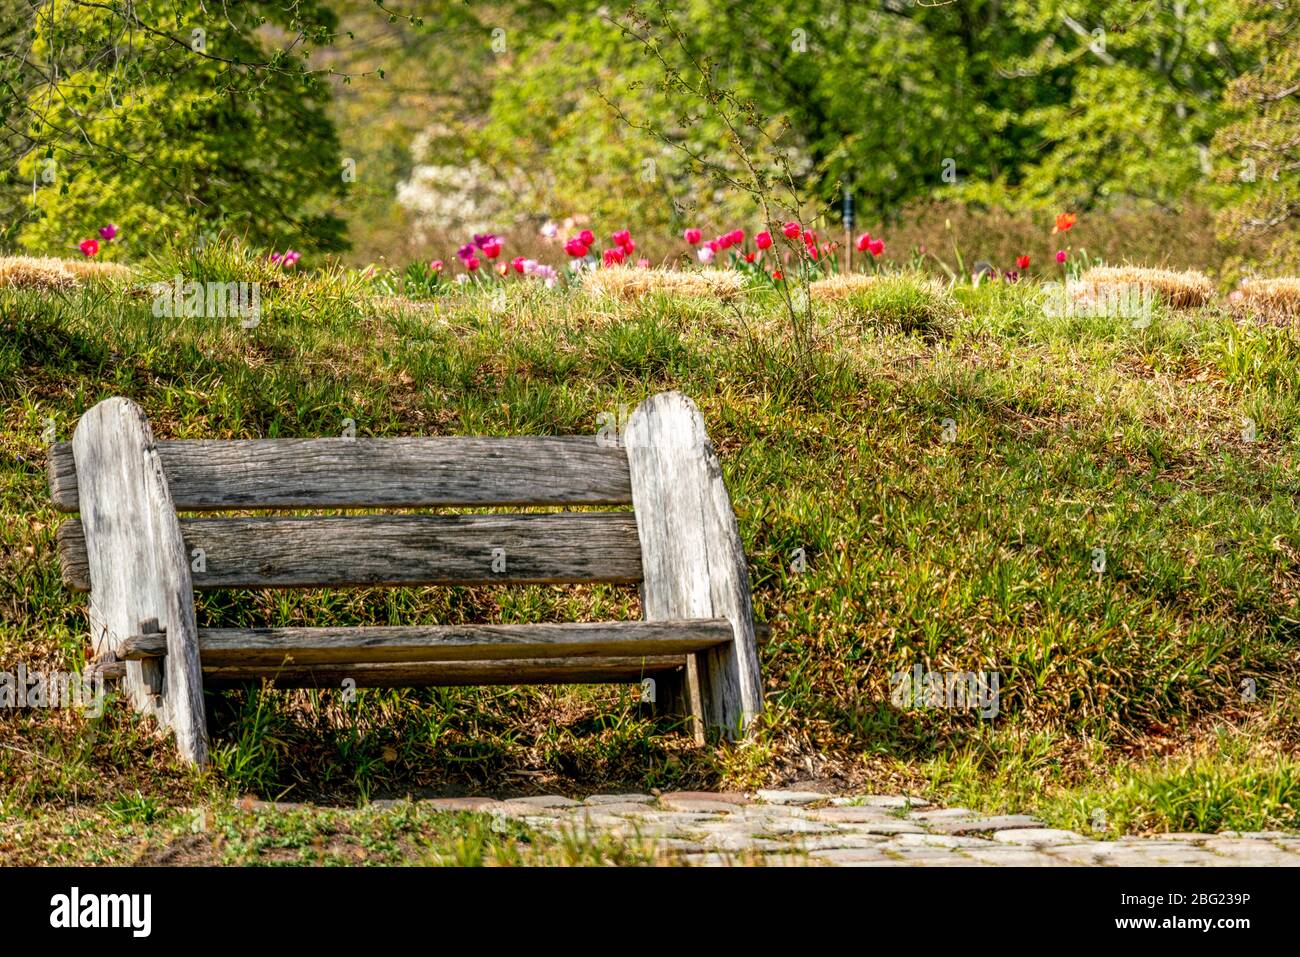 Unusual wooden park bench at spring time with tulips in the background Stock Photo